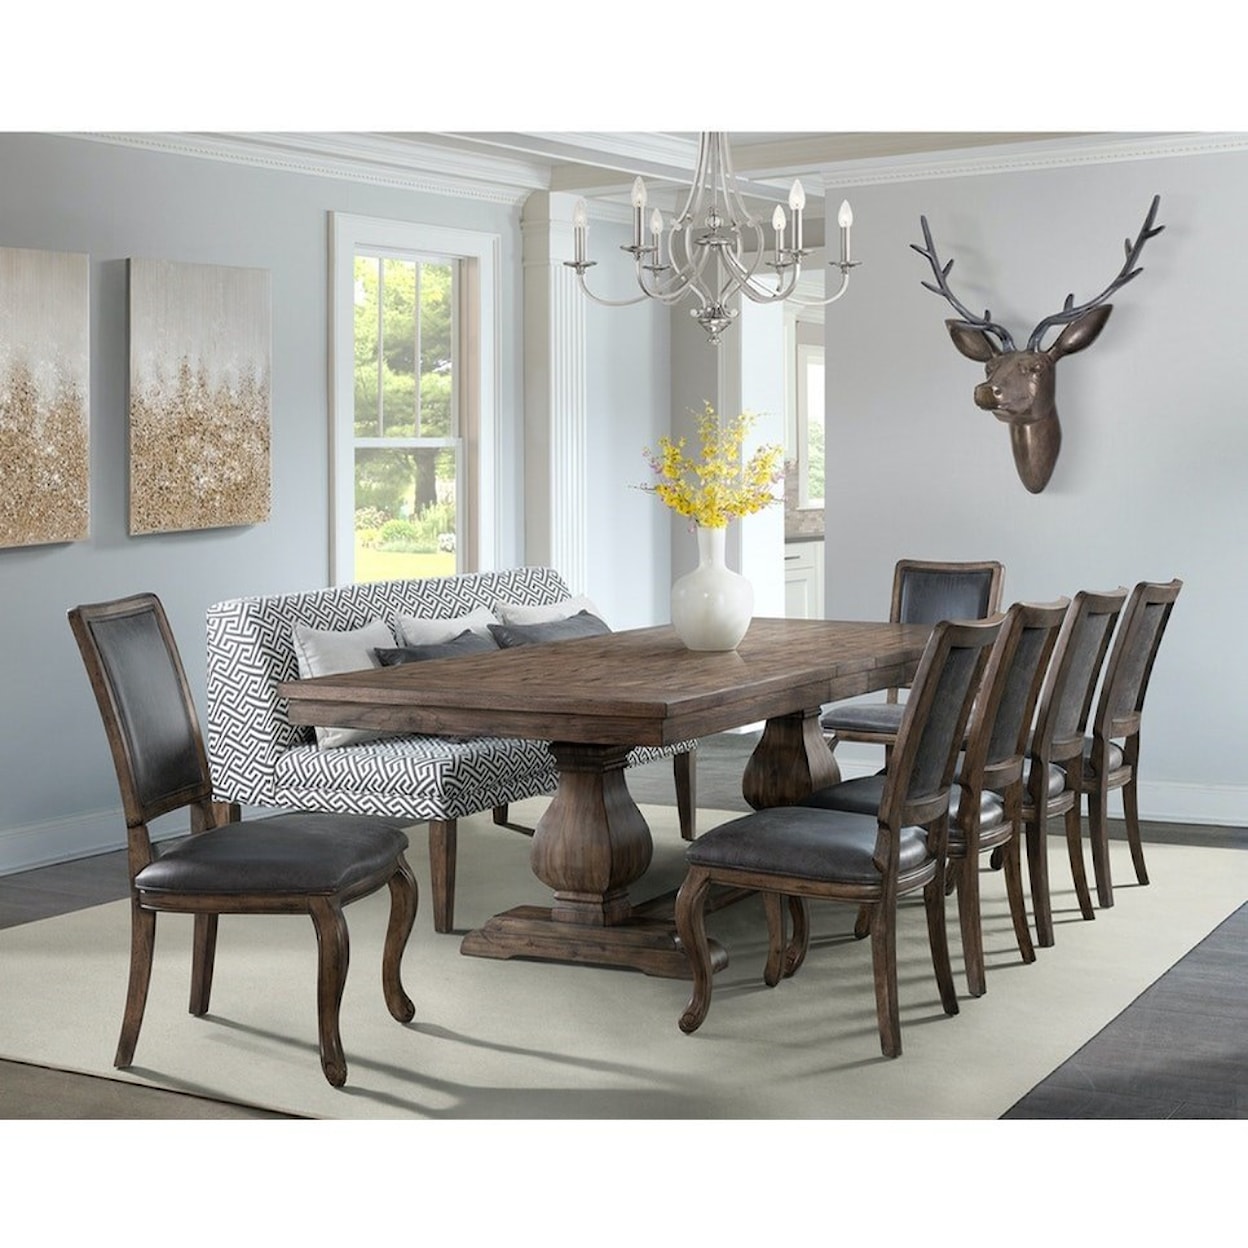 Elements International Gramercy 8-Piece Table and Chair Set with Bench